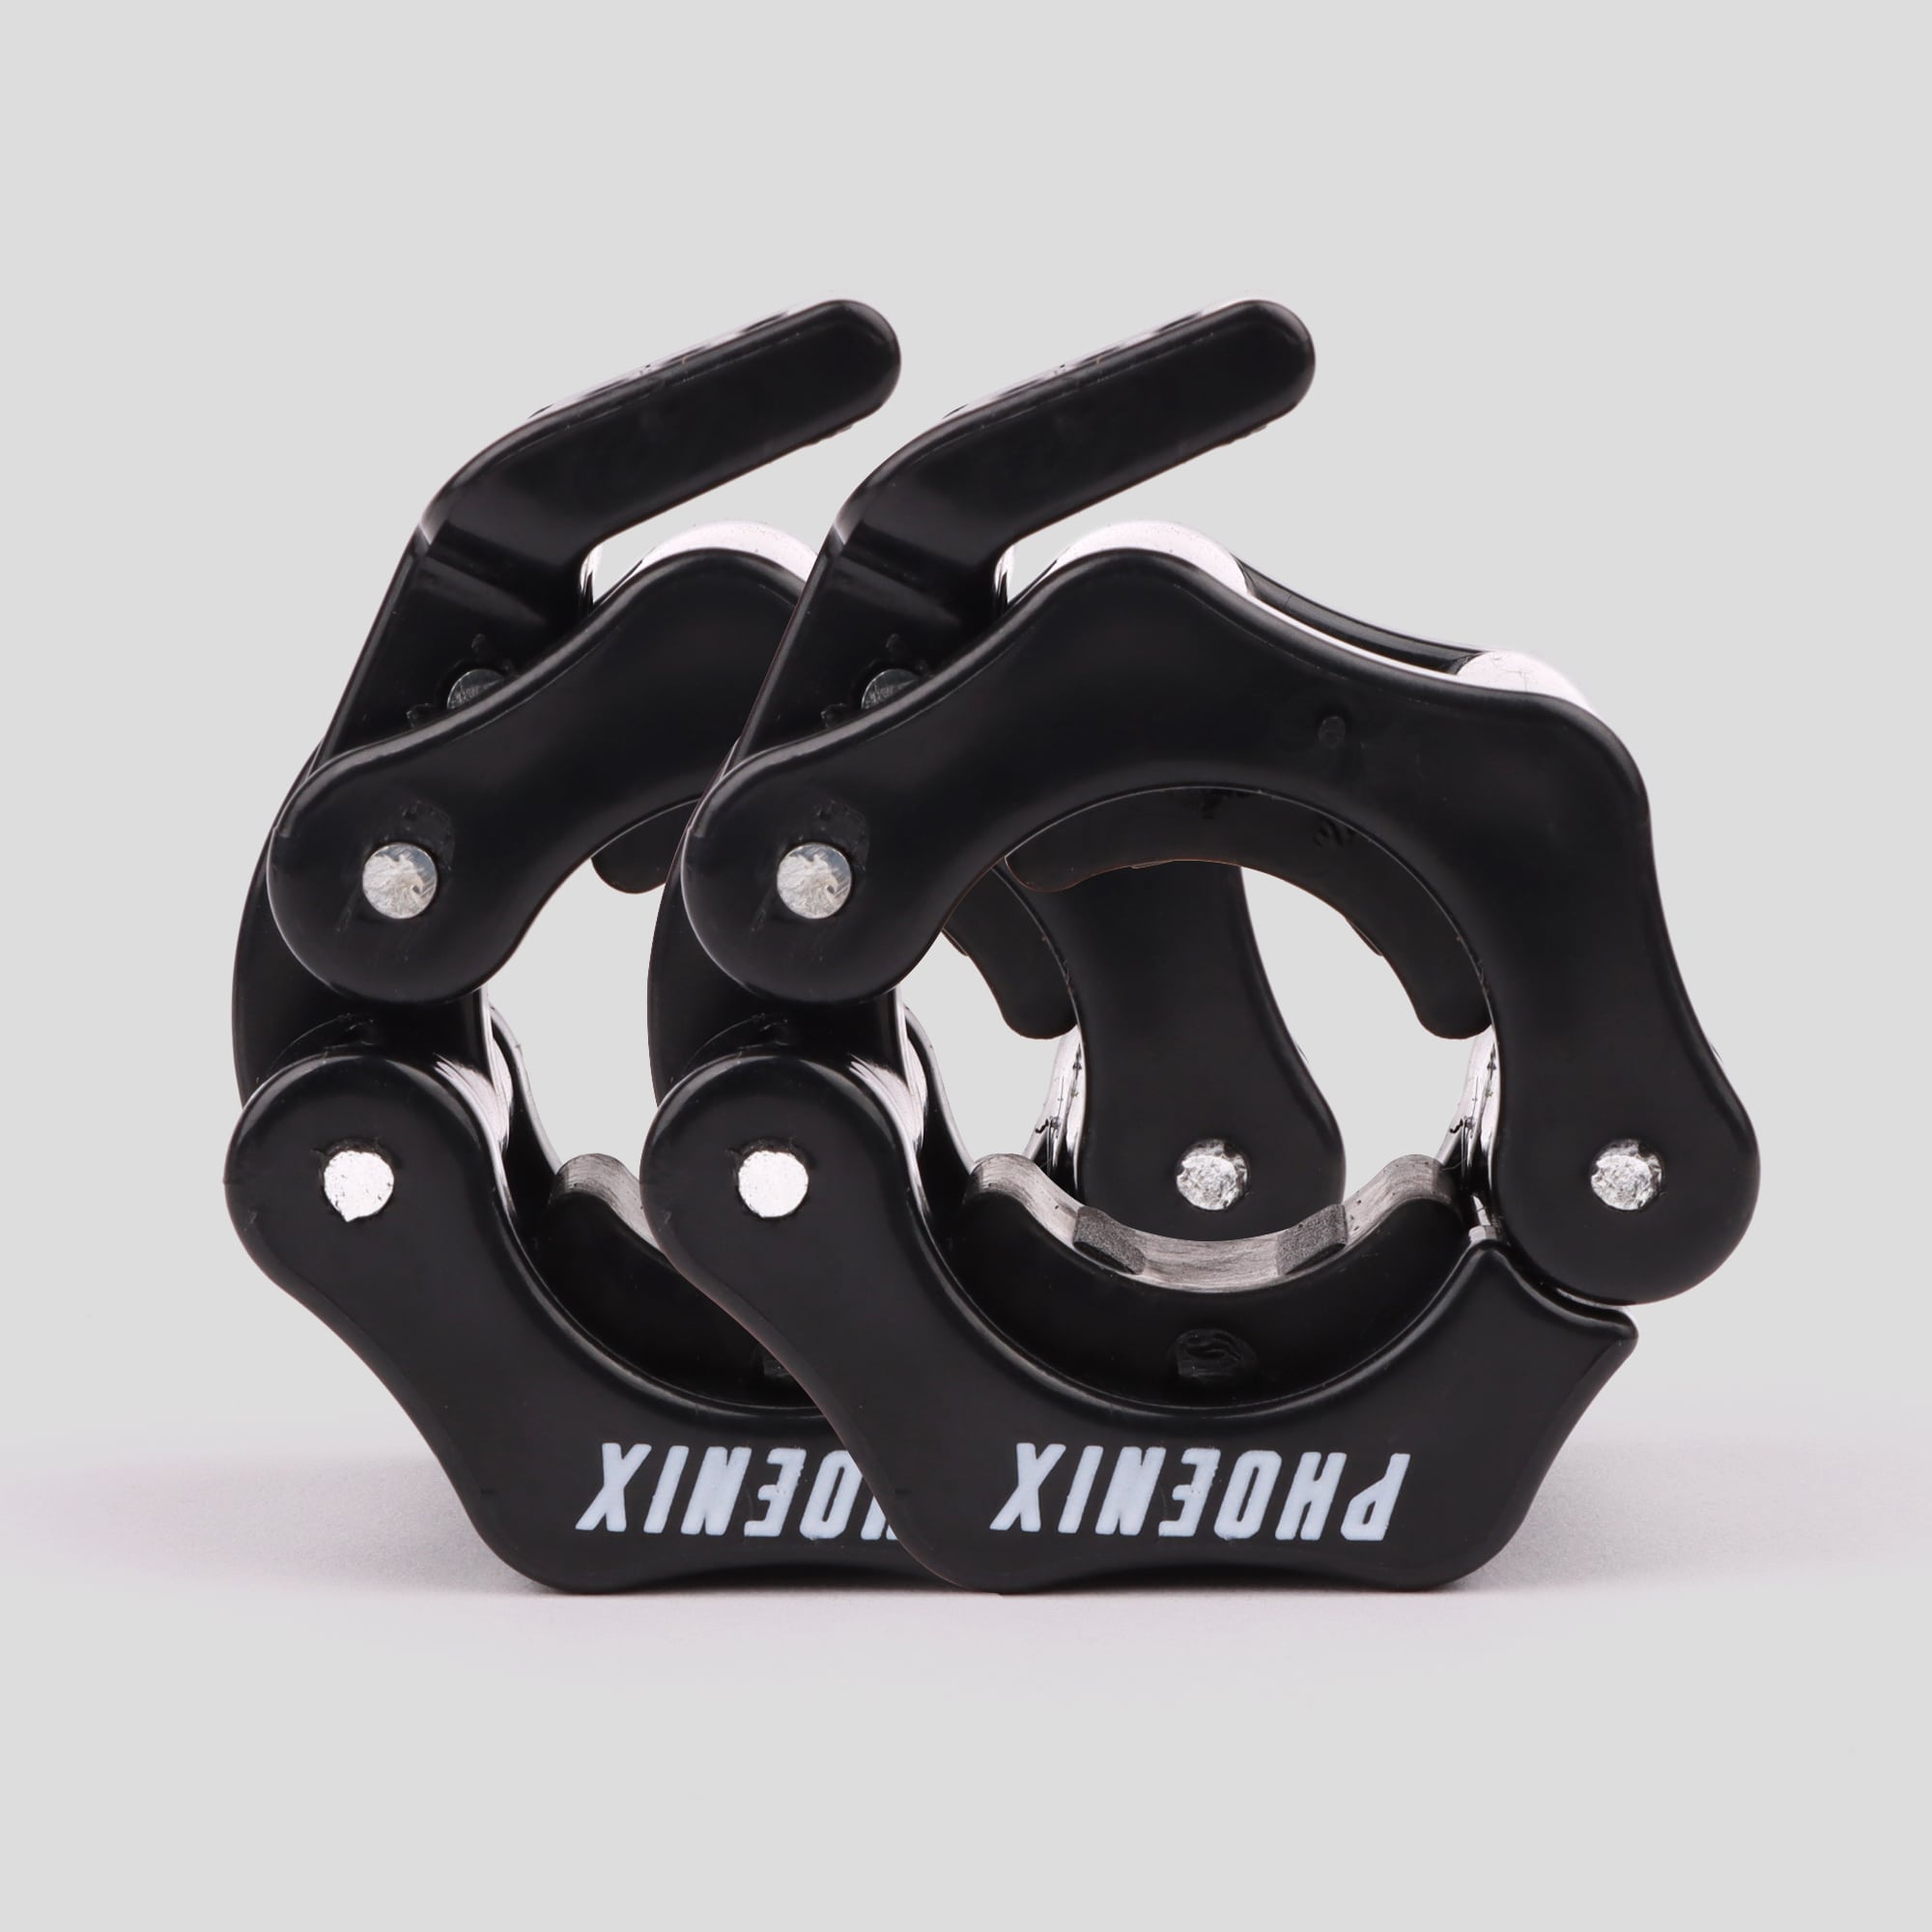 1-inch Barbell Clamps - Black